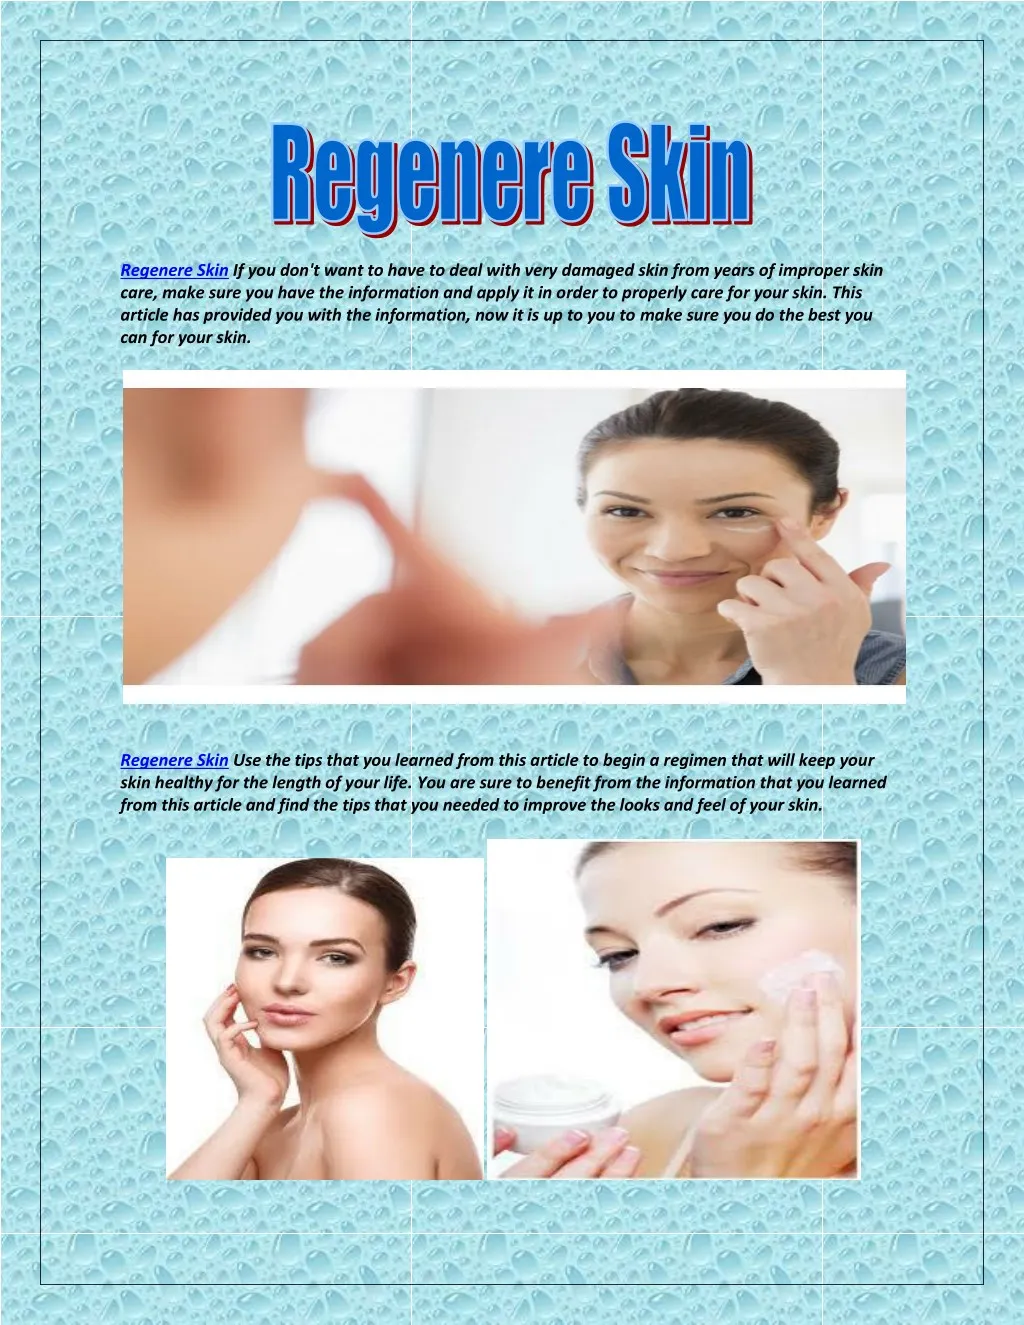 regenere skin if you don t want to have to deal